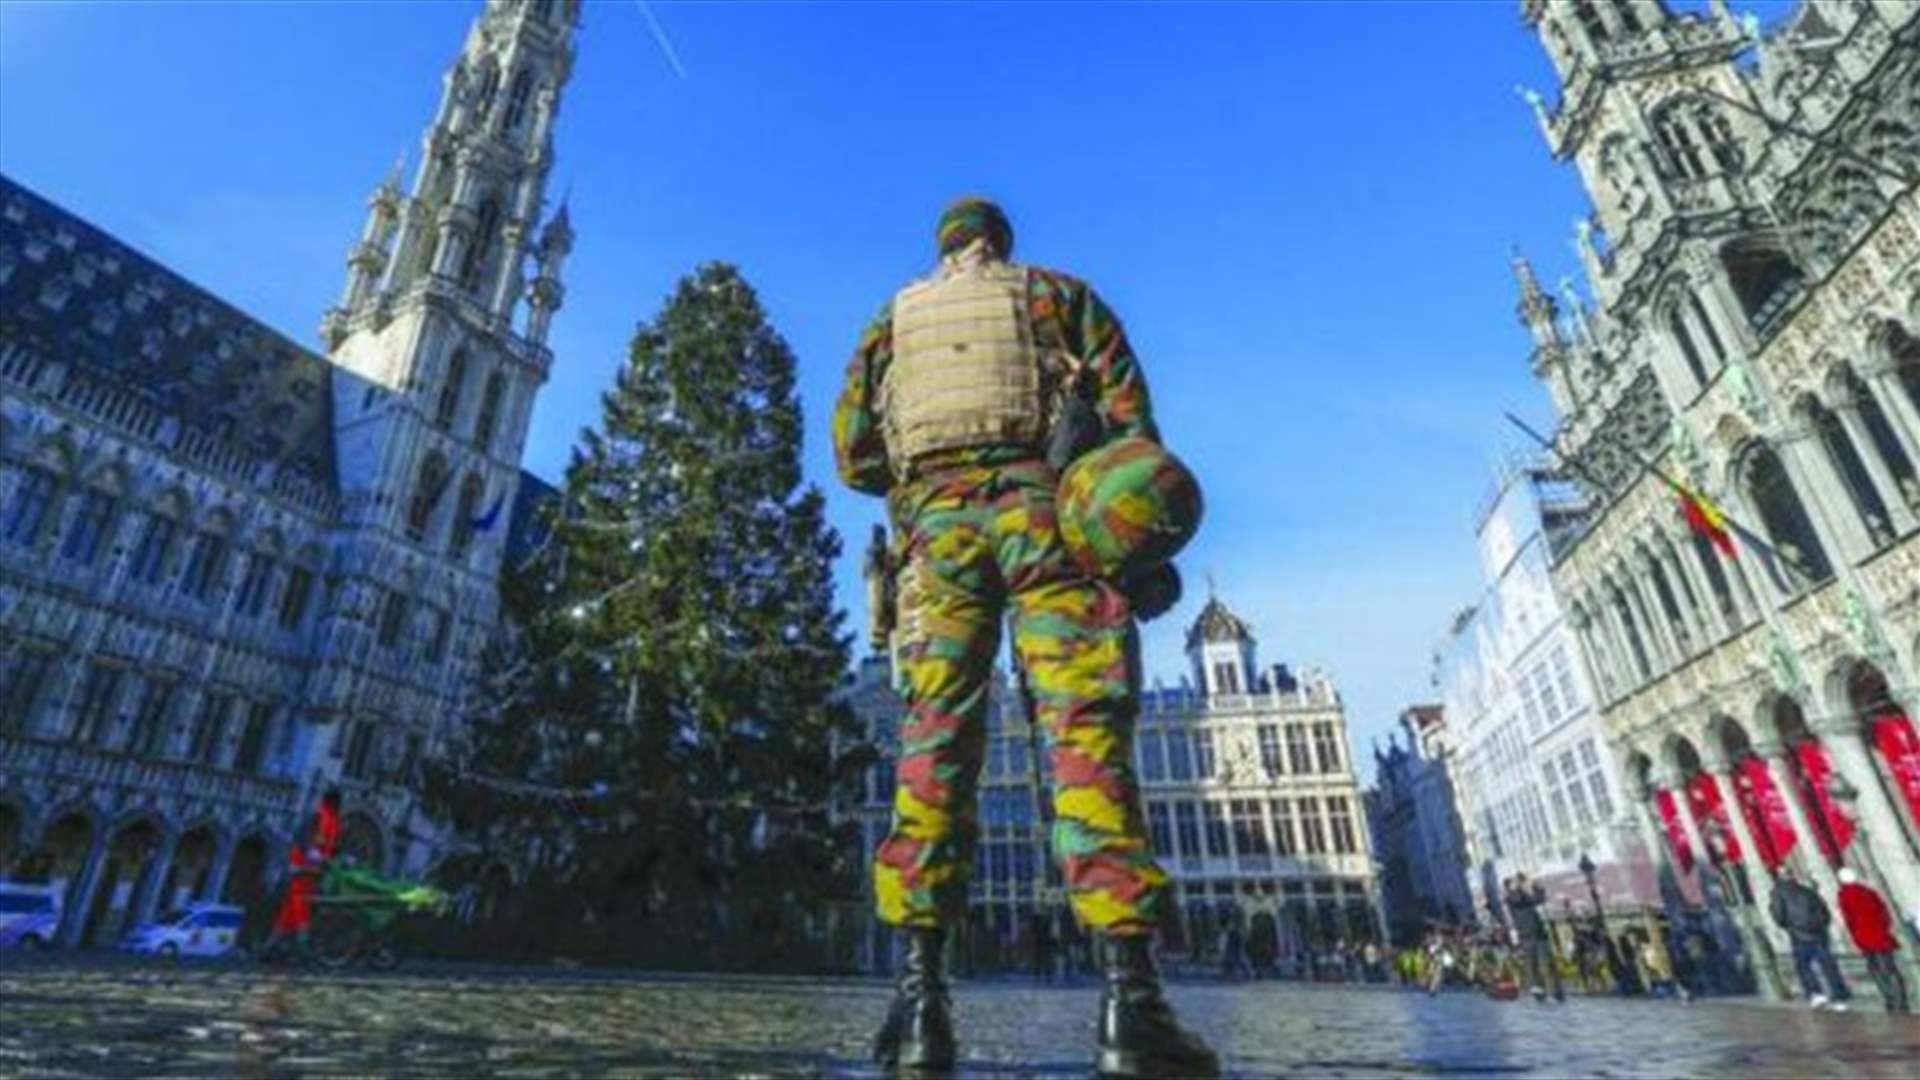 Belgium arrests man trying to drive down shopping street at high speed